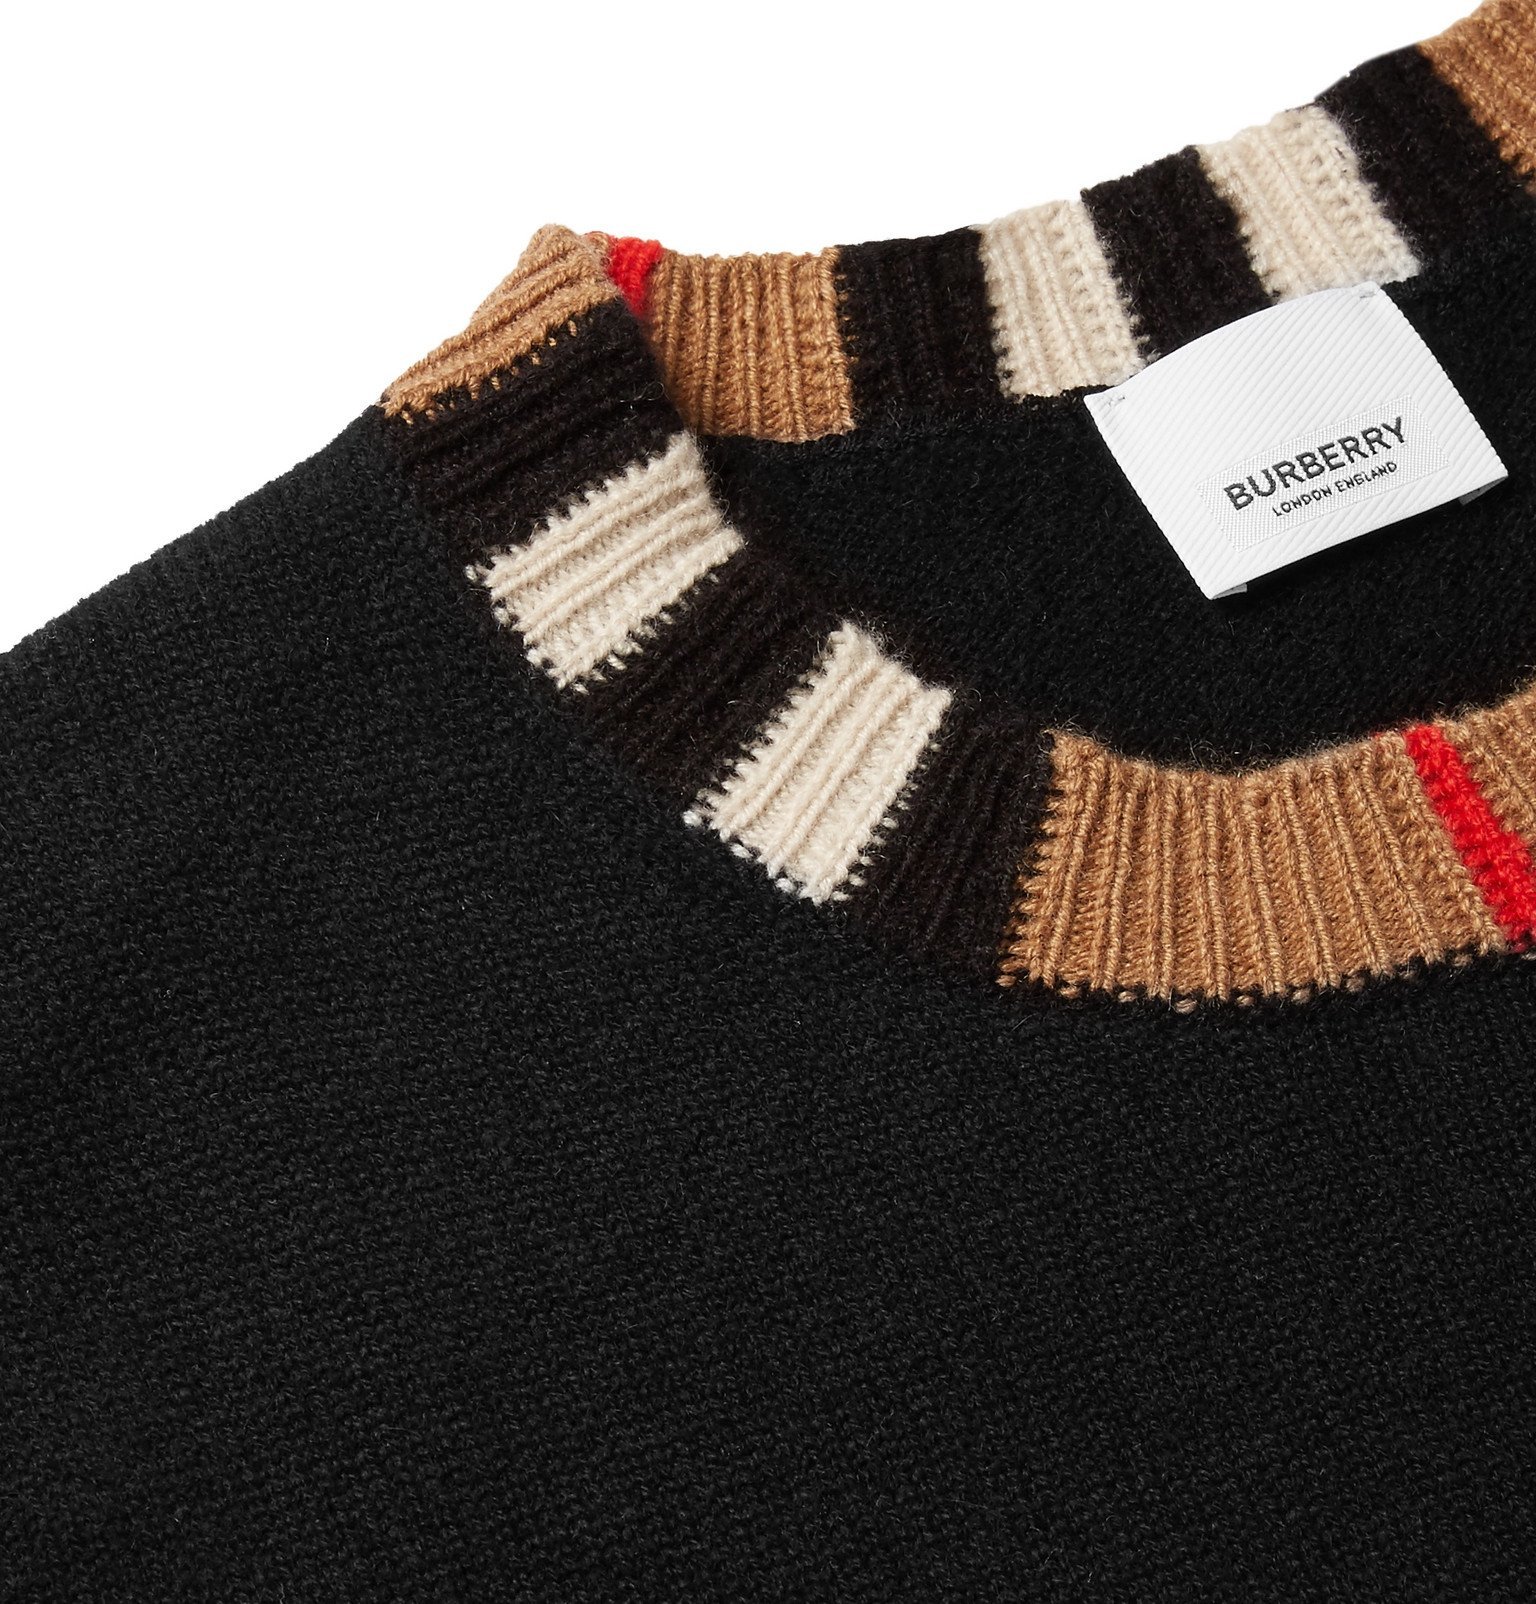 Burberry - Check-Trimmed Cashmere Sweater - Black Burberry